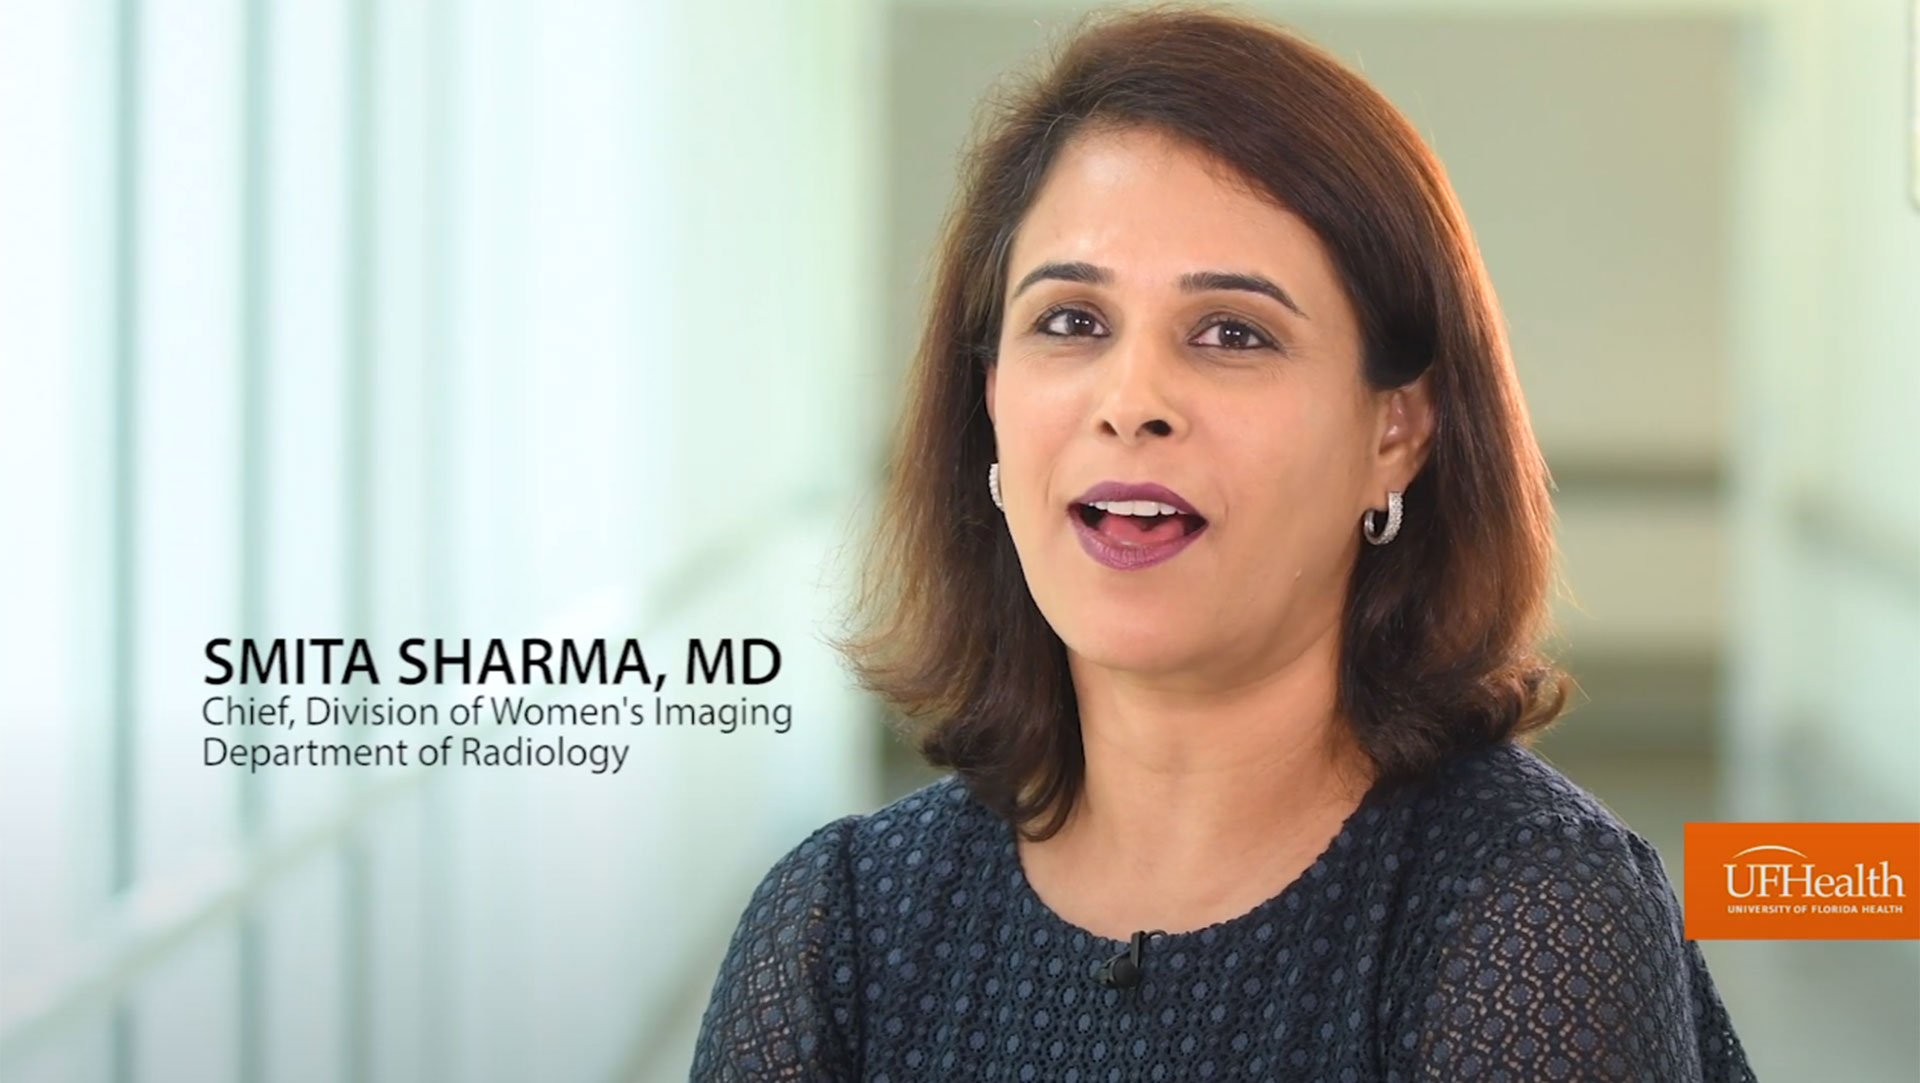 UF Health radiologist Dr. Smita Sharma discusses mammograms and breast health